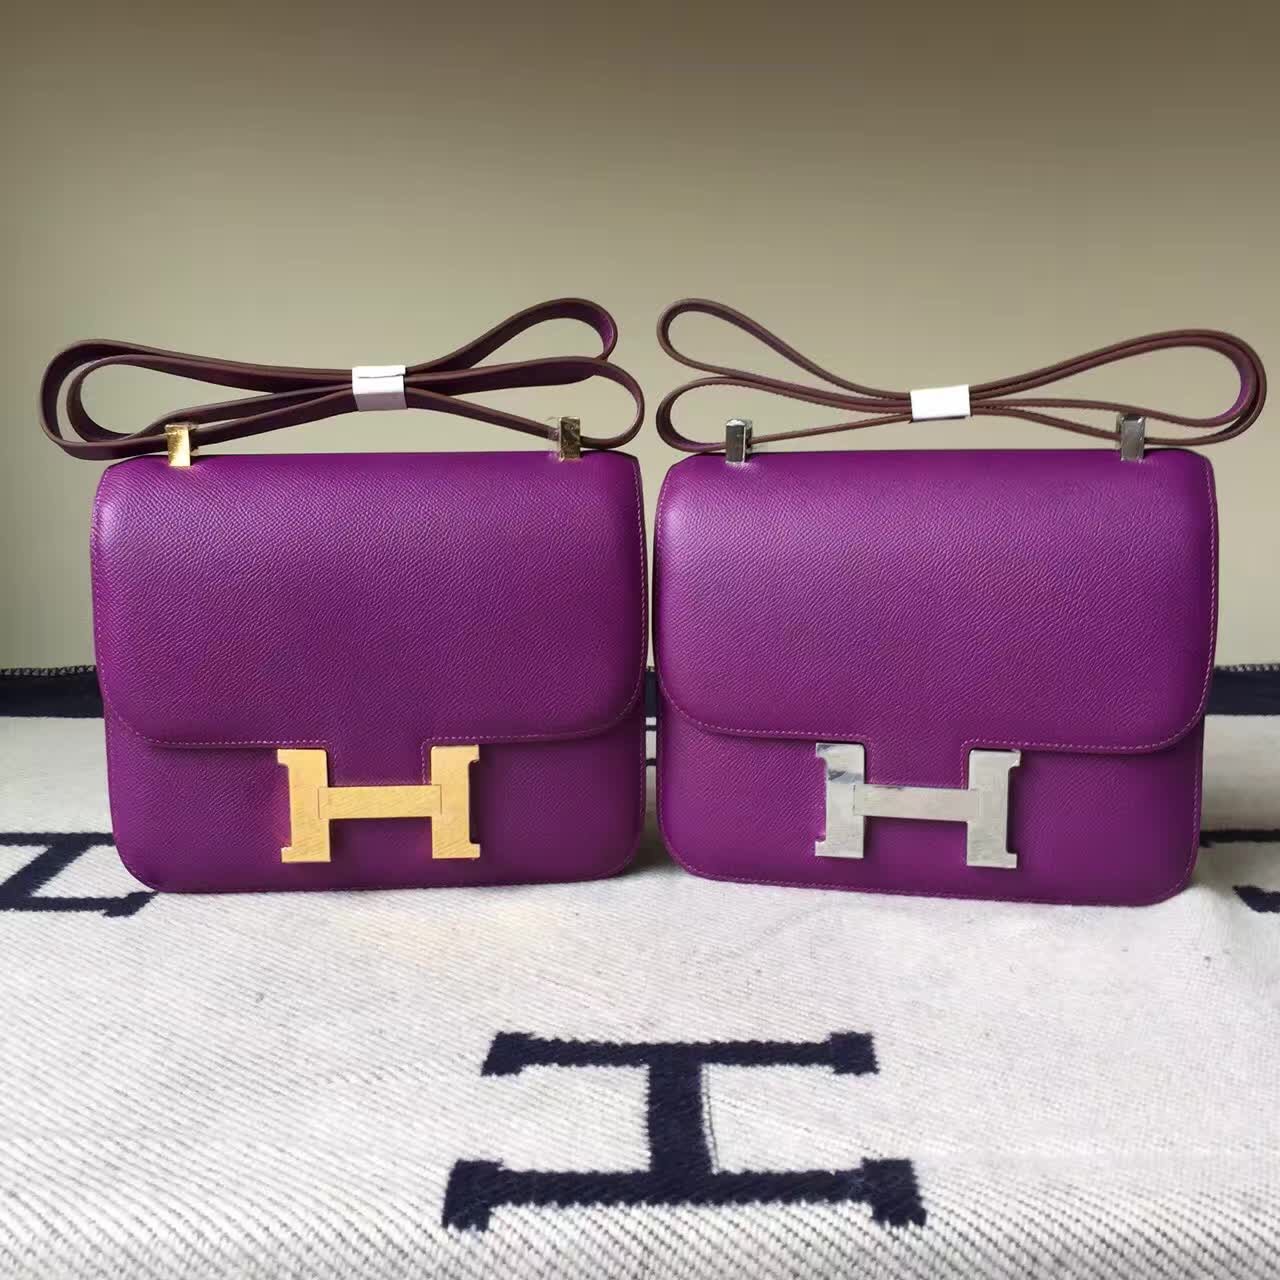 New Fashion Hermes Epsom Leather Constance Bag in P9 Anemone Purple ...